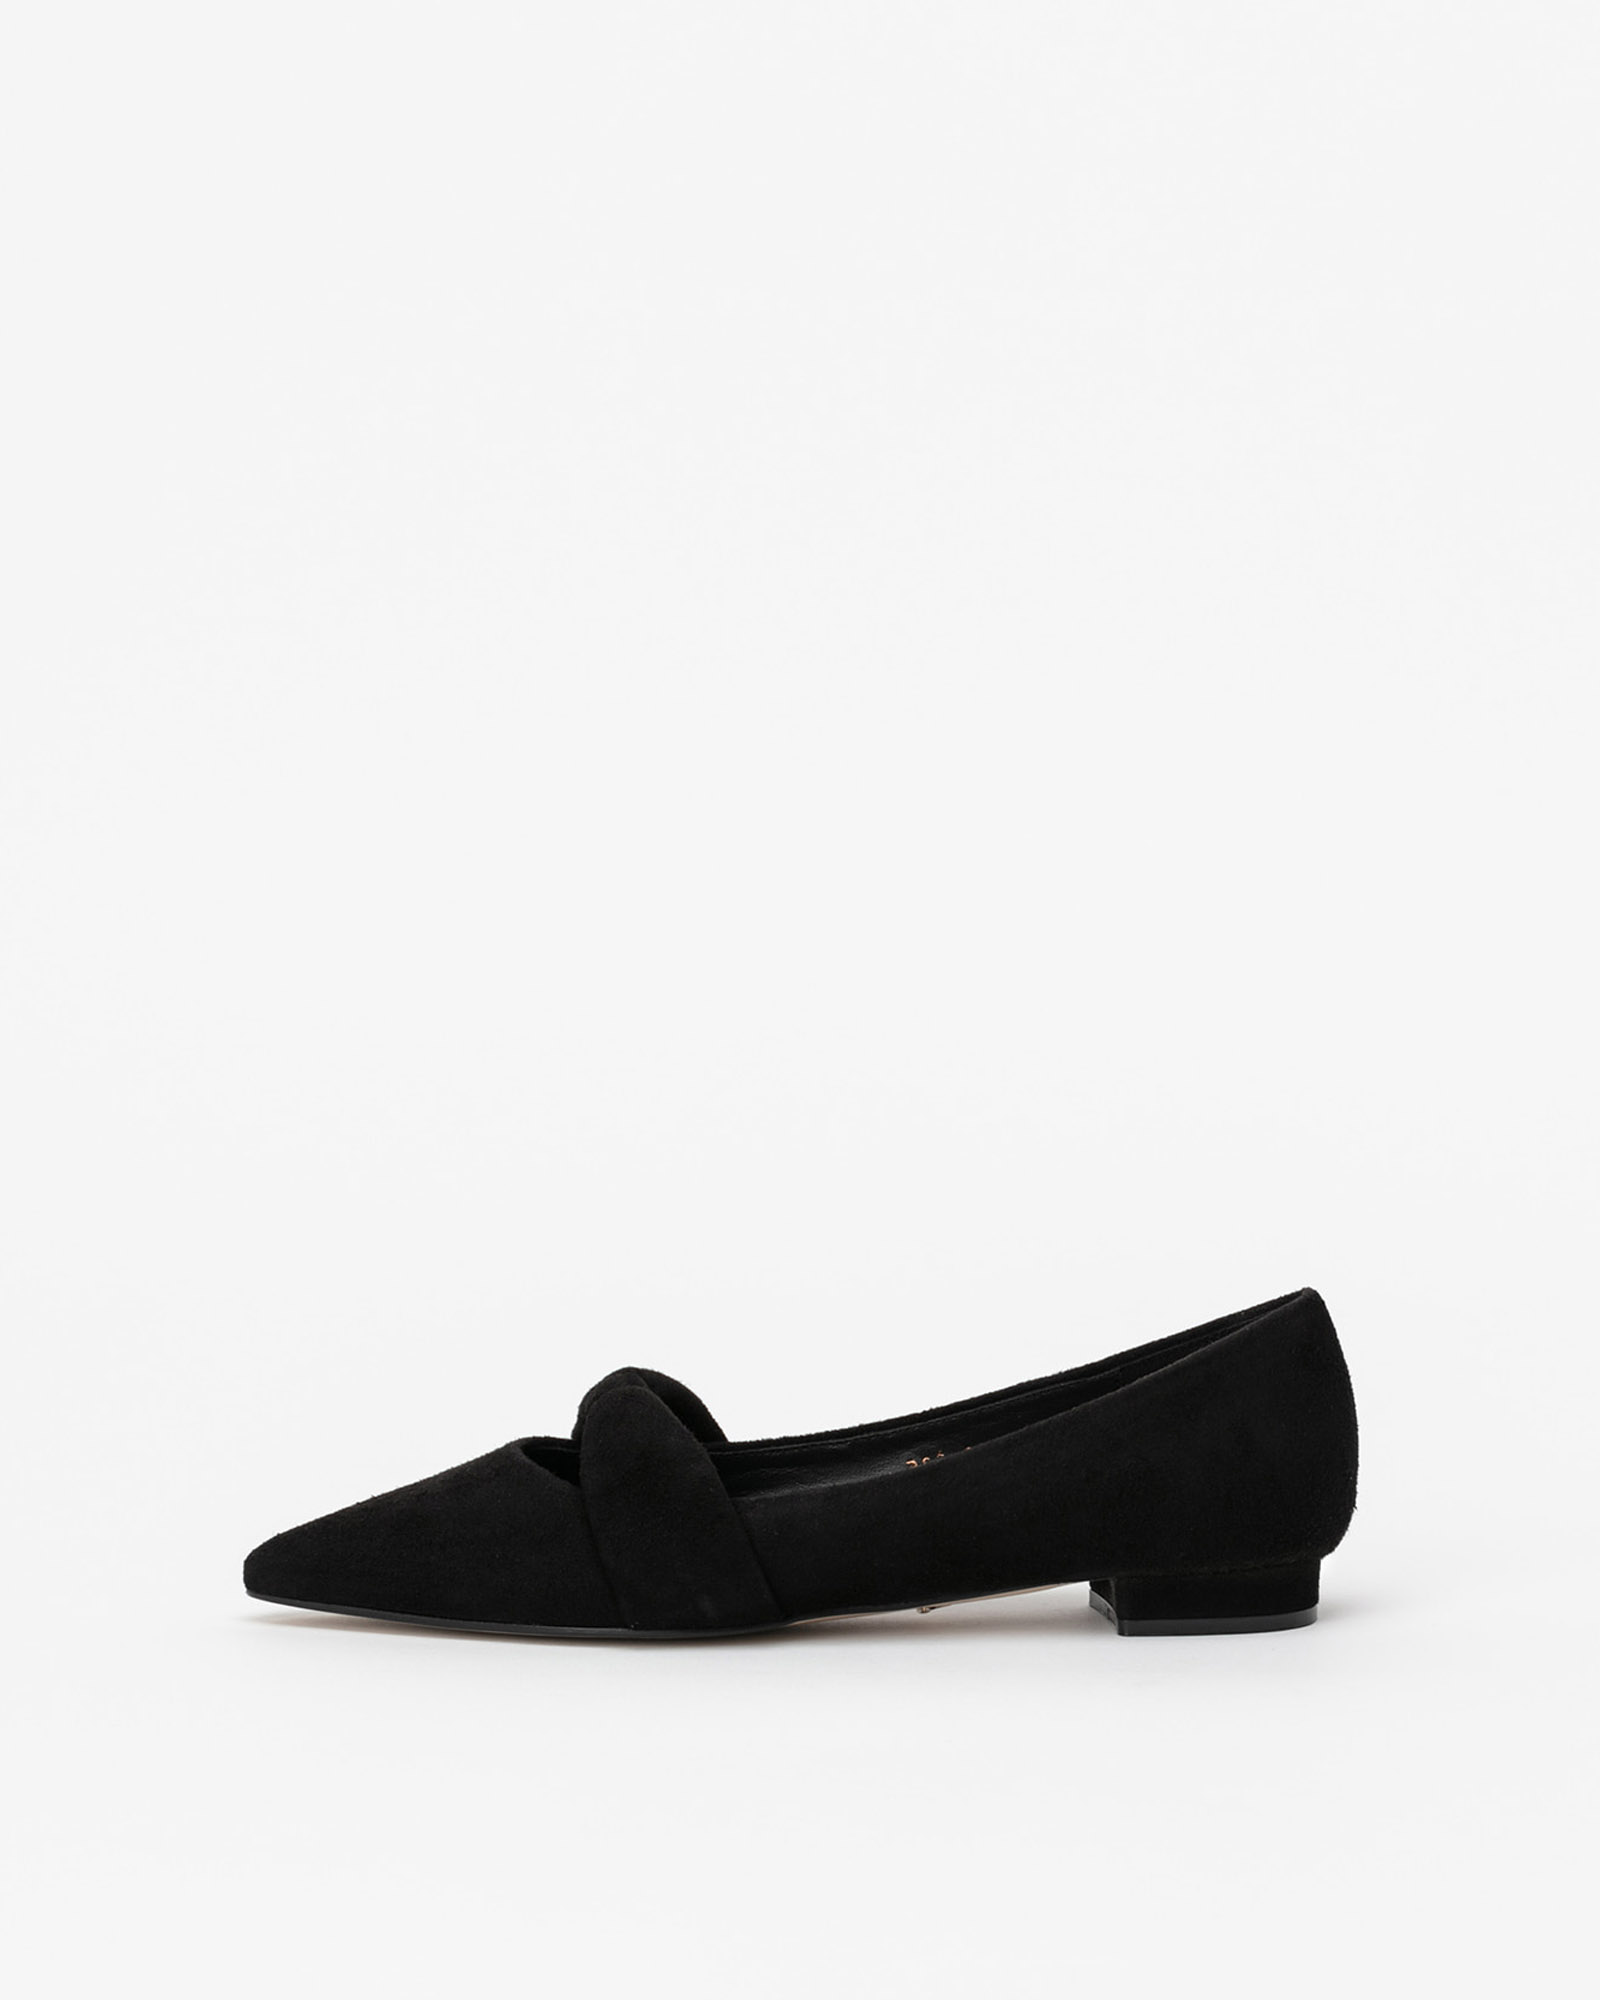 Rennes Flat Shoes in Black Suede